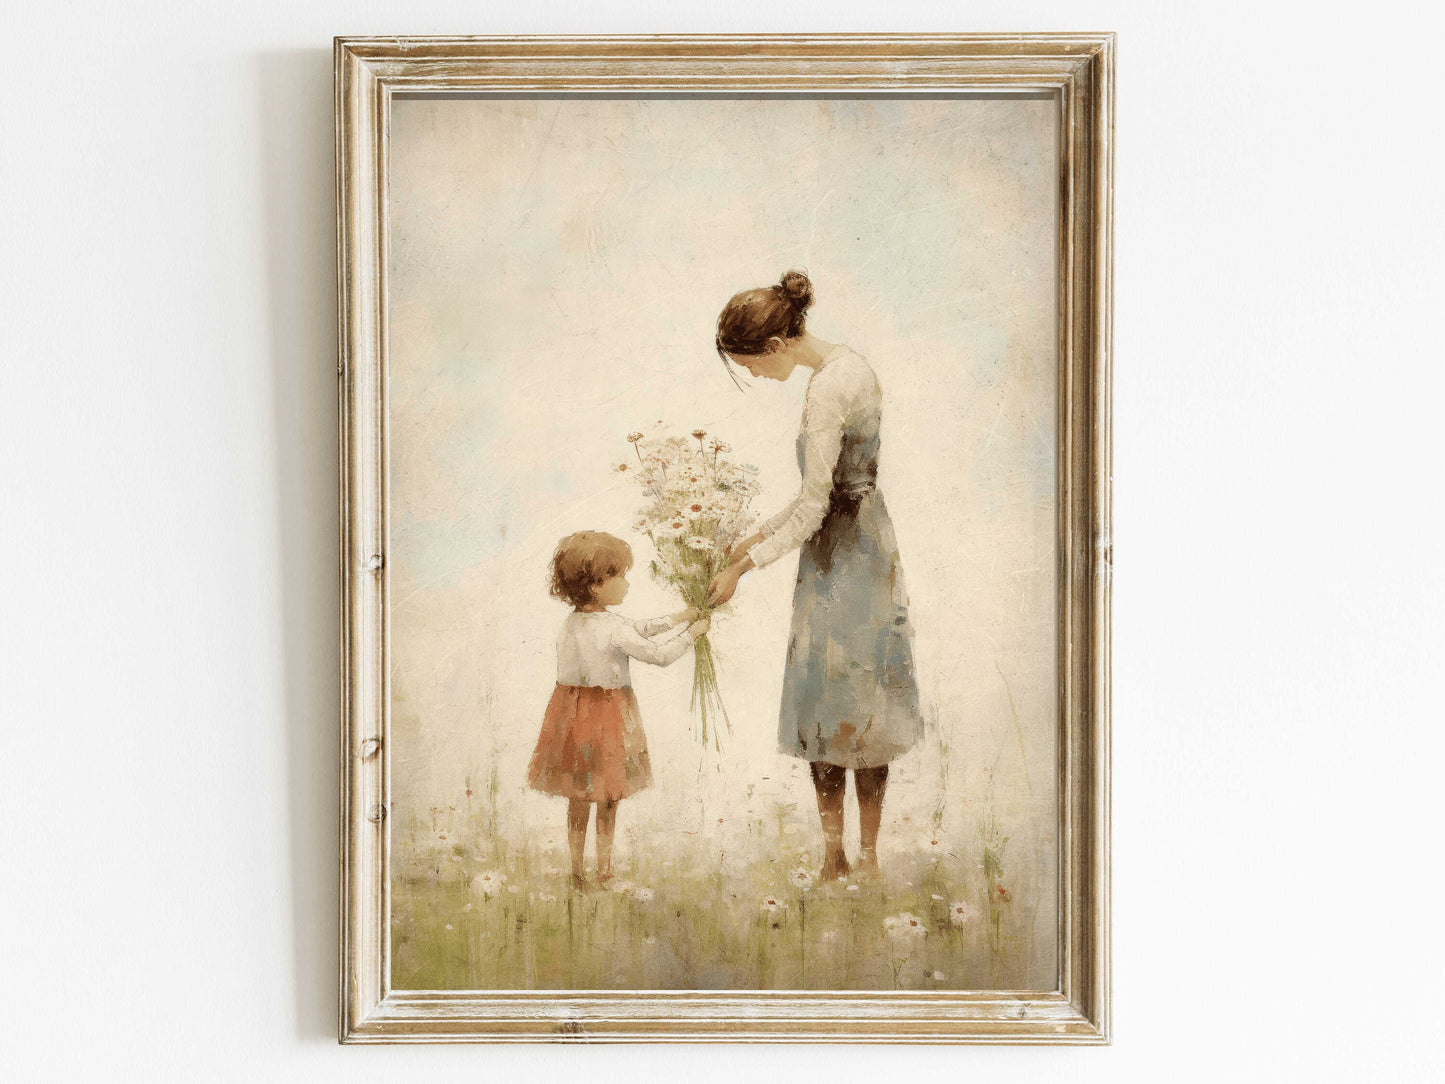 Mother Daughter Bond Wall Art, Girly Decor, Flower Painting, Gift for Mothers, Rustic Nursery Decor Girl, Vintage Digital Printable Wall Art